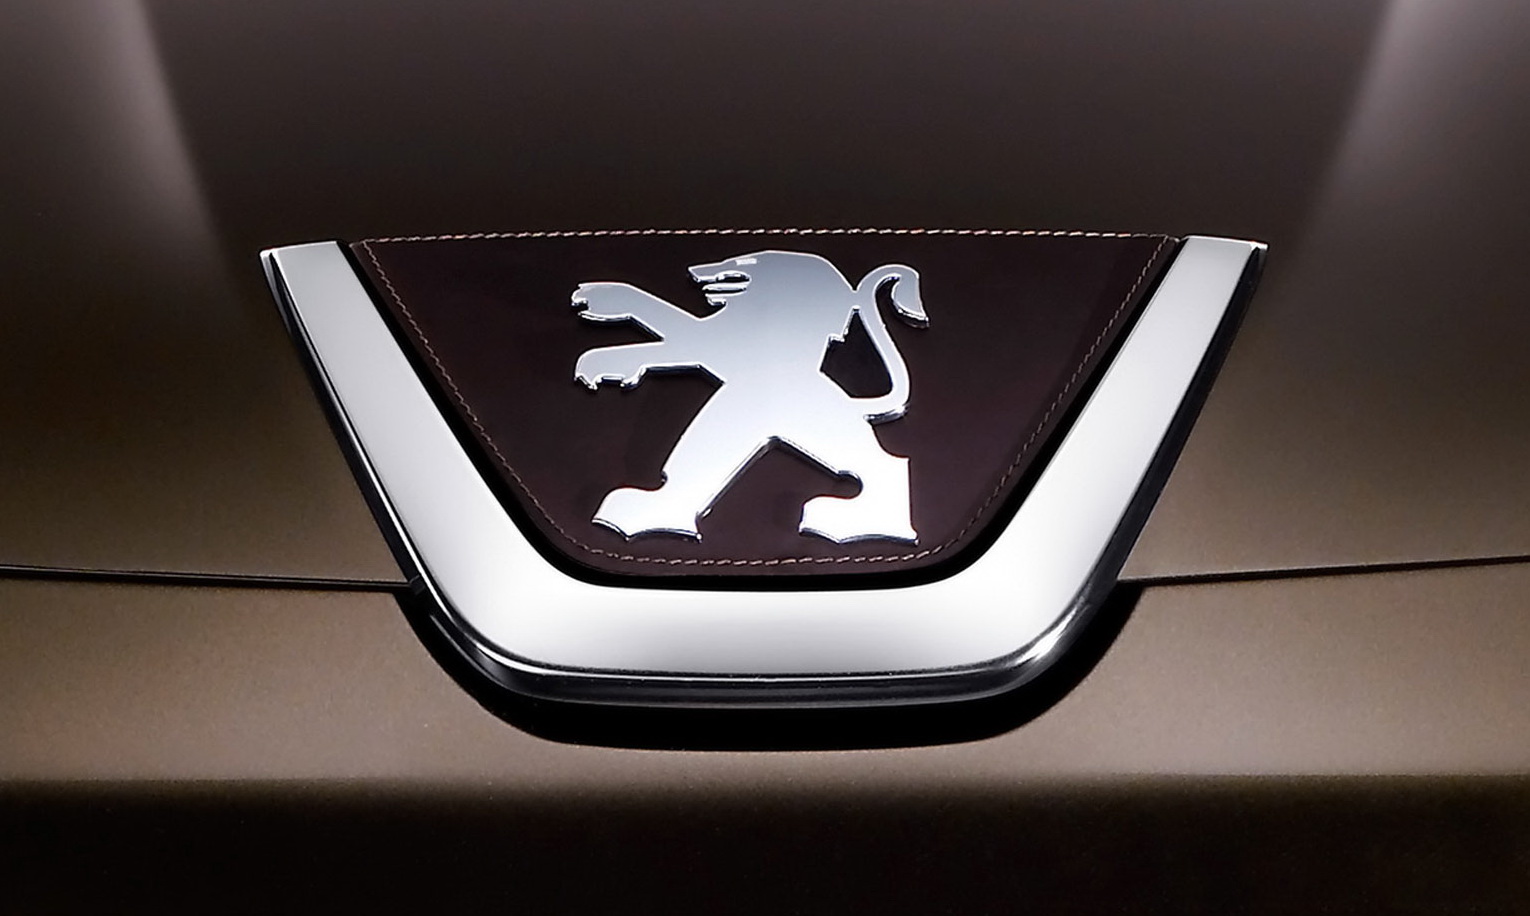 Peugeot Logo, Peugeot Car Symbol Meaning and History.